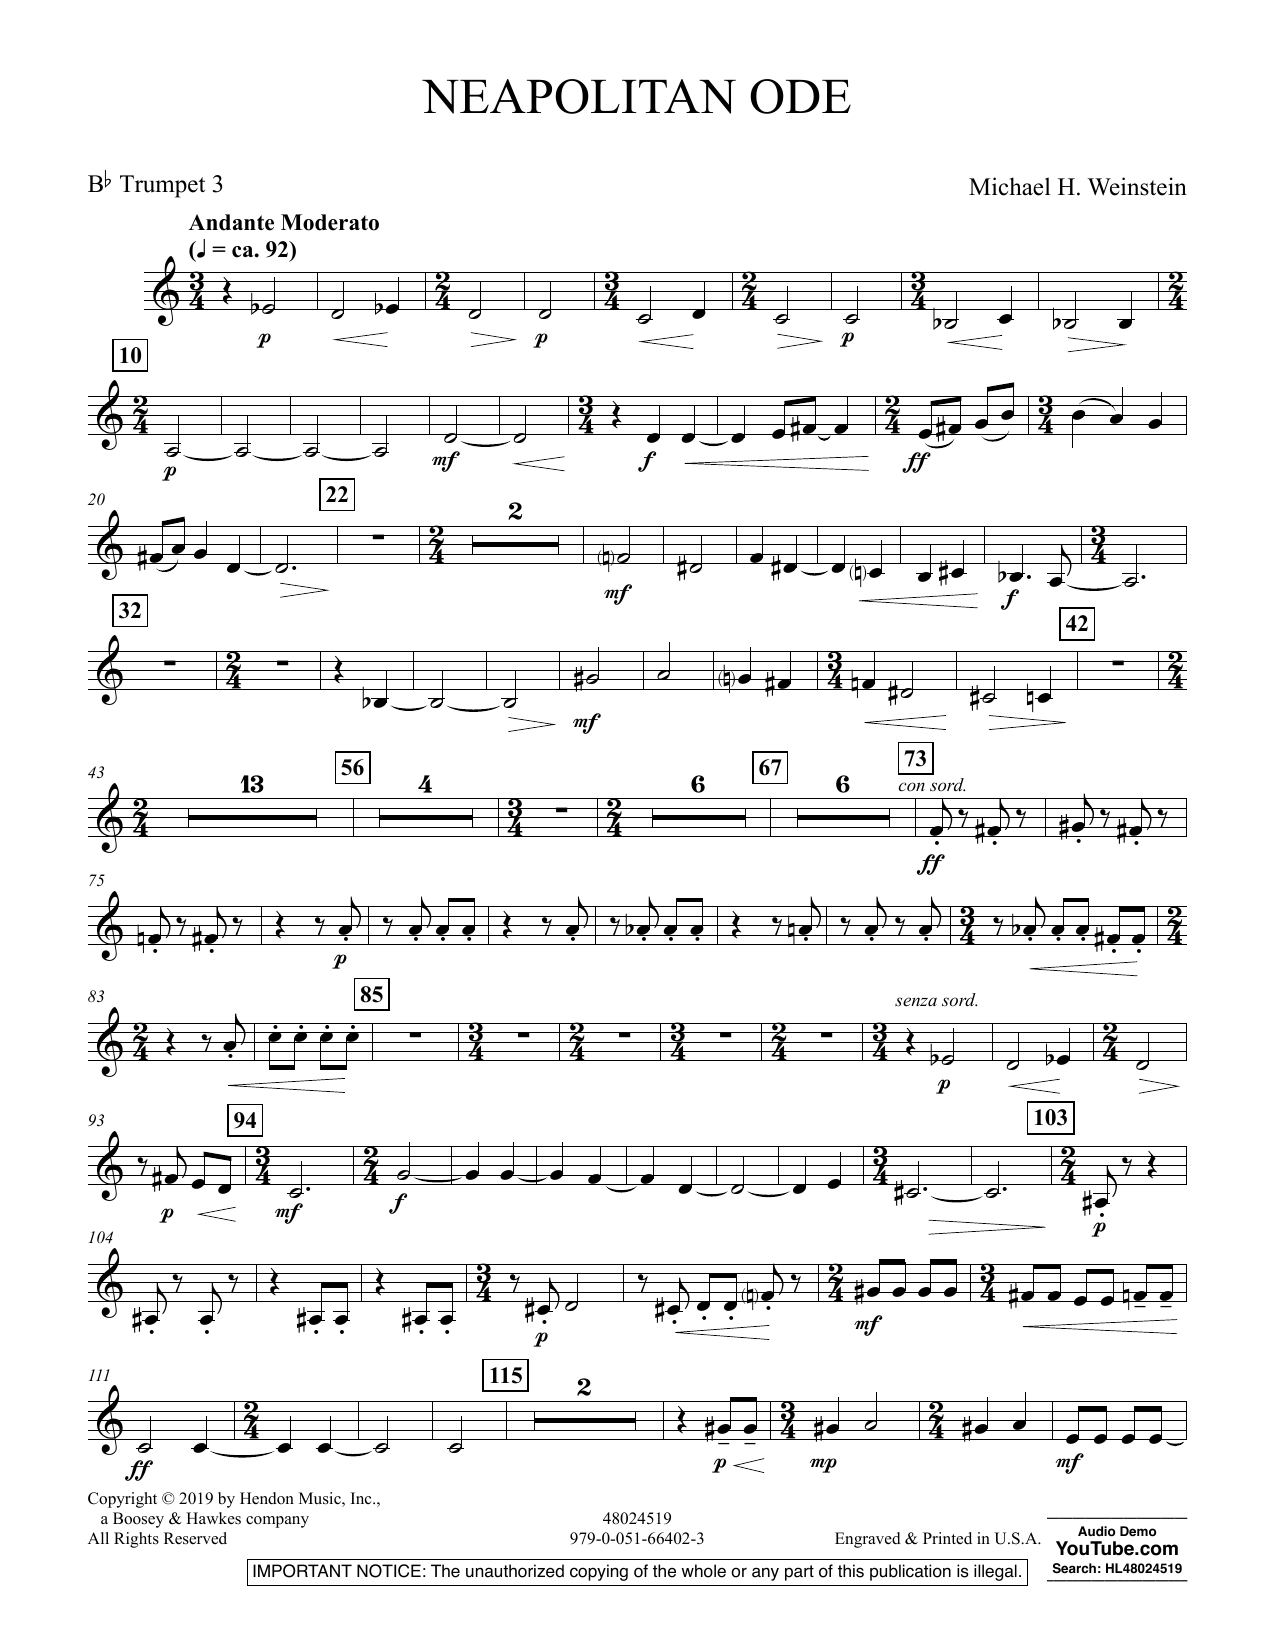 Michael H. Weinstein Neapolitan Ode - Bb Trumpet 3 sheet music preview music notes and score for Concert Band including 2 page(s)